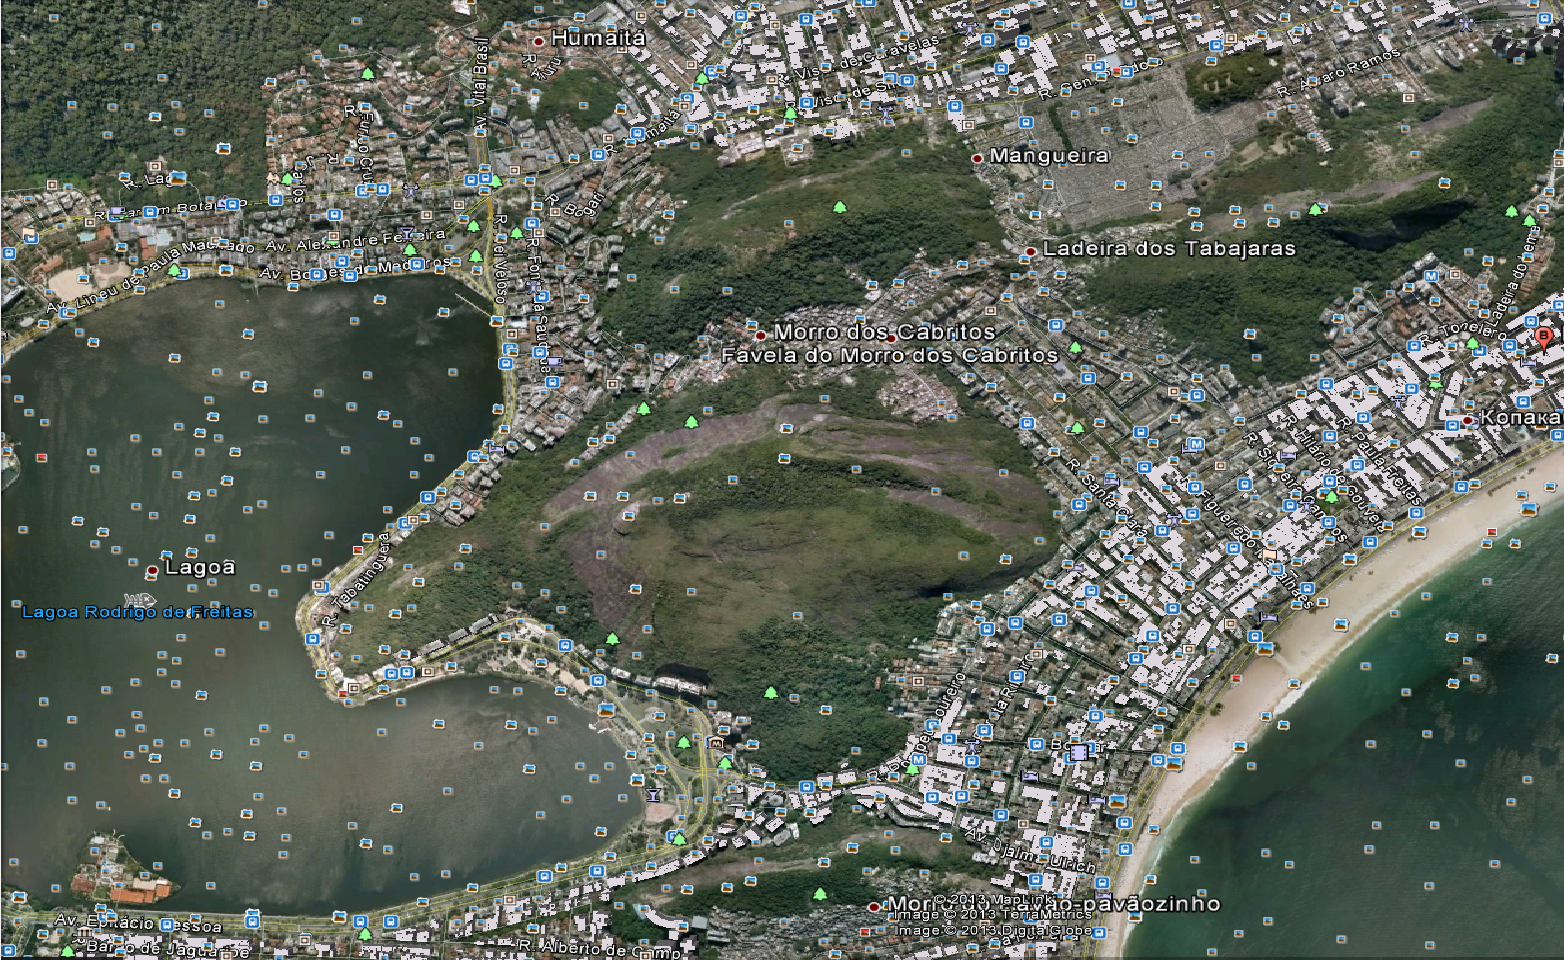 Atlantic Forest Screen from Google Earth.